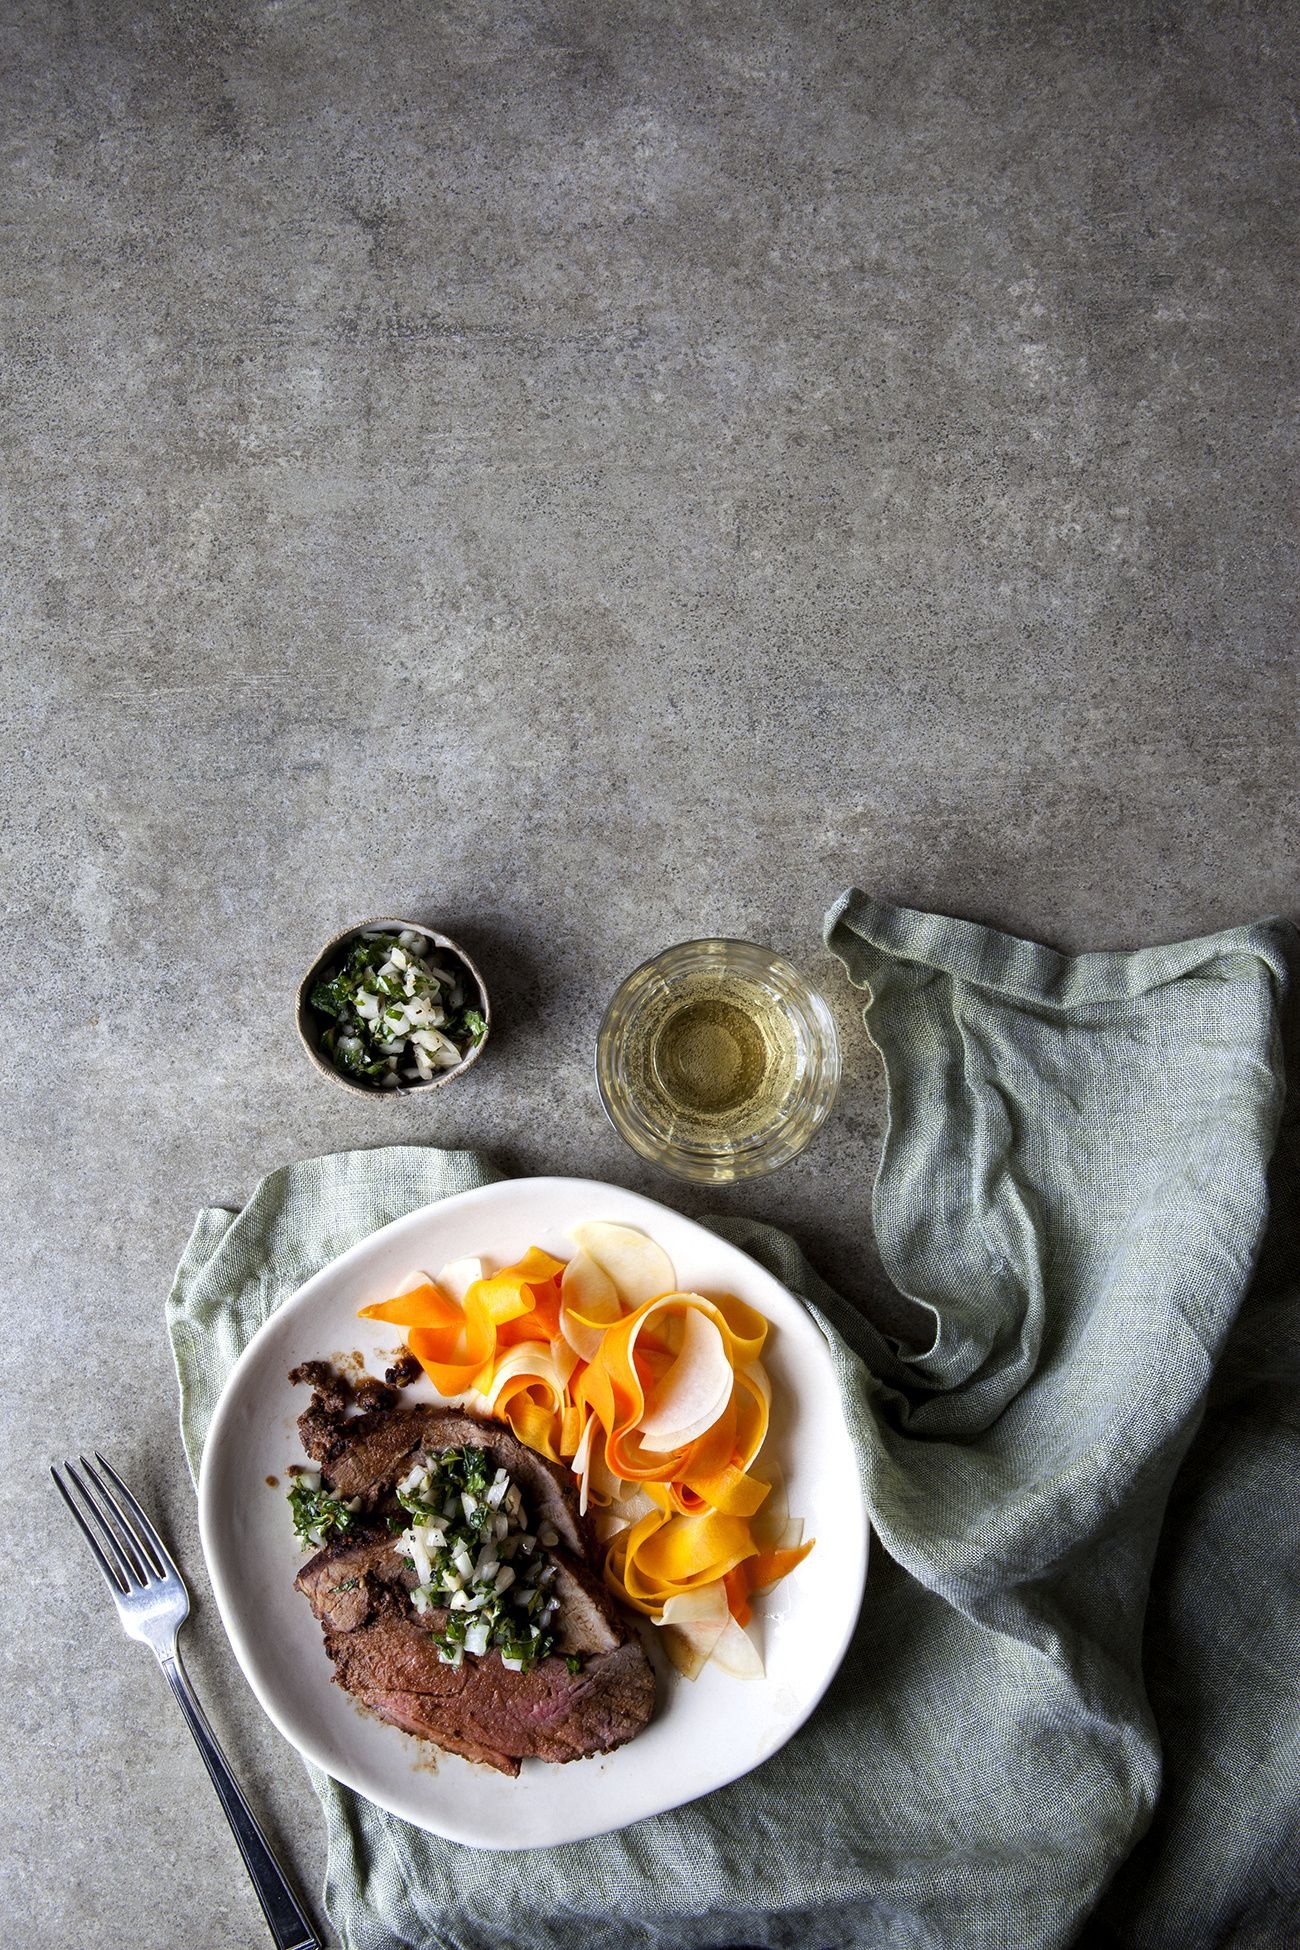 Food and table inspiration, Artistic food photography, Delicious food ideas, Gastronomic delights, 1300x1950 HD Handy